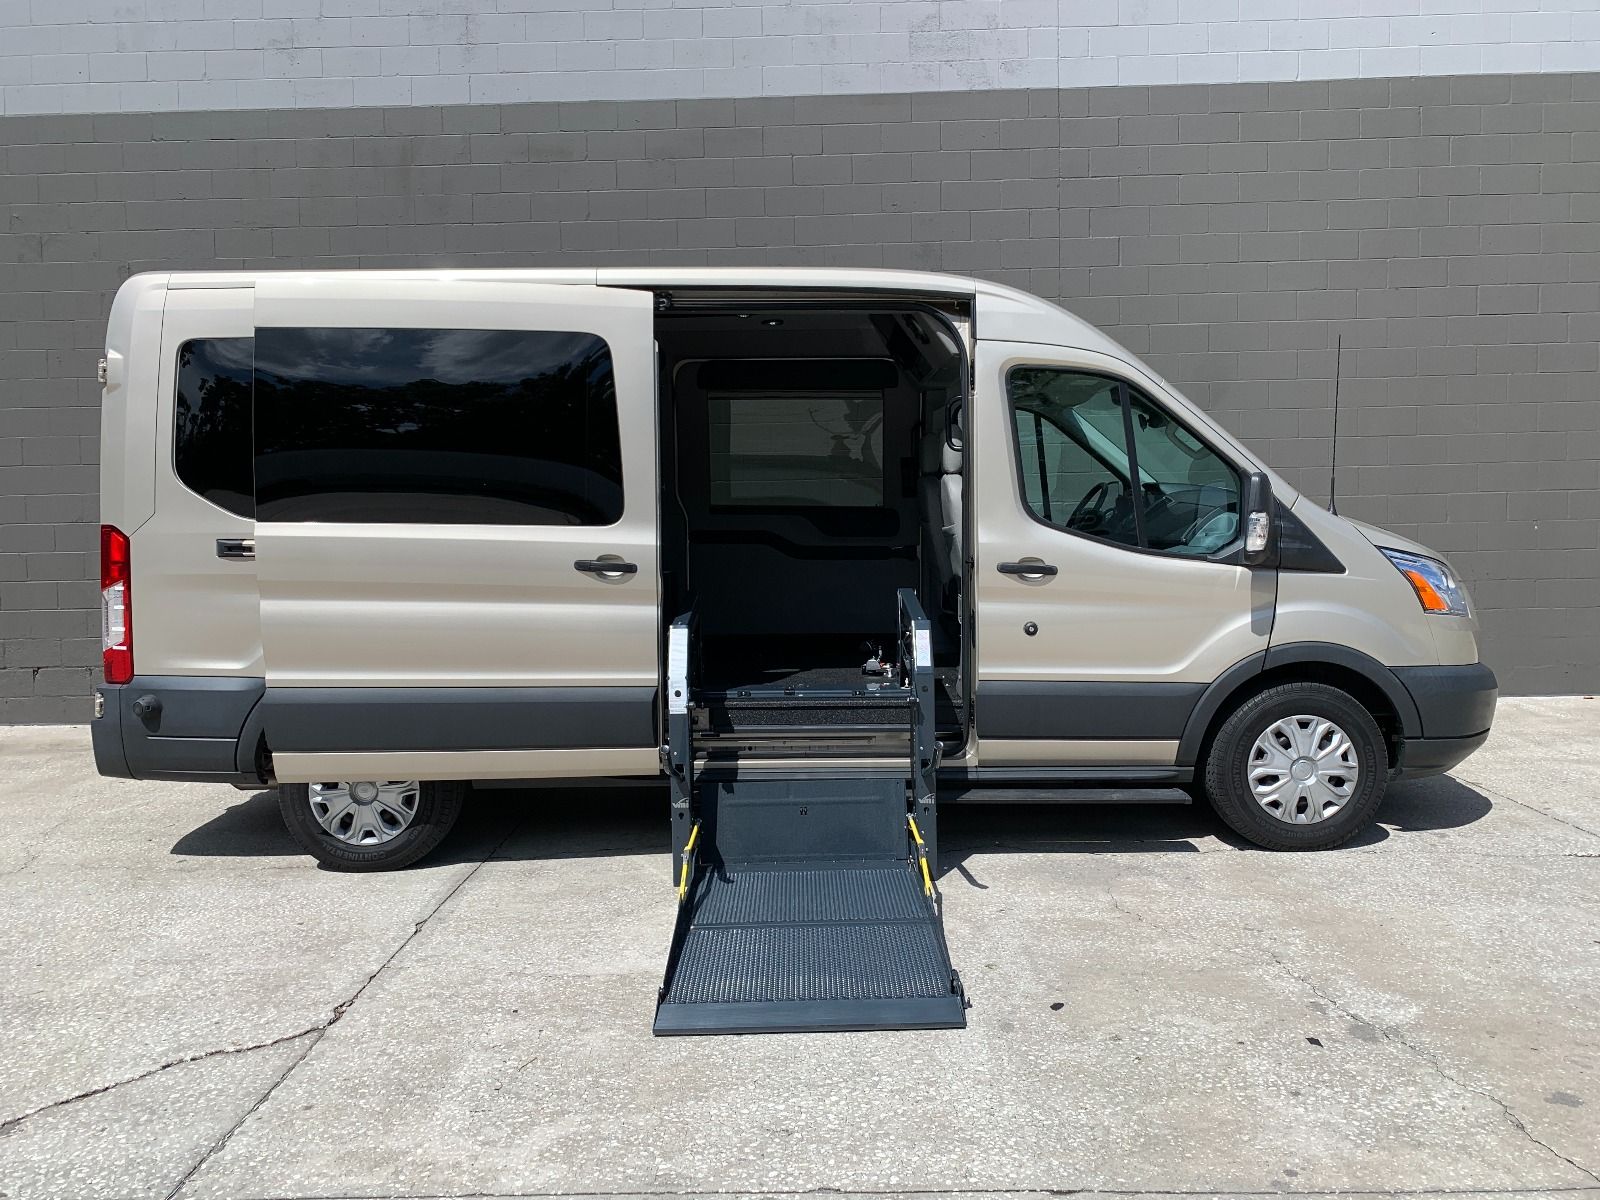 Gold Ford Transit Full Size Wheelchair van with lift deployed from passenger side sliding door.